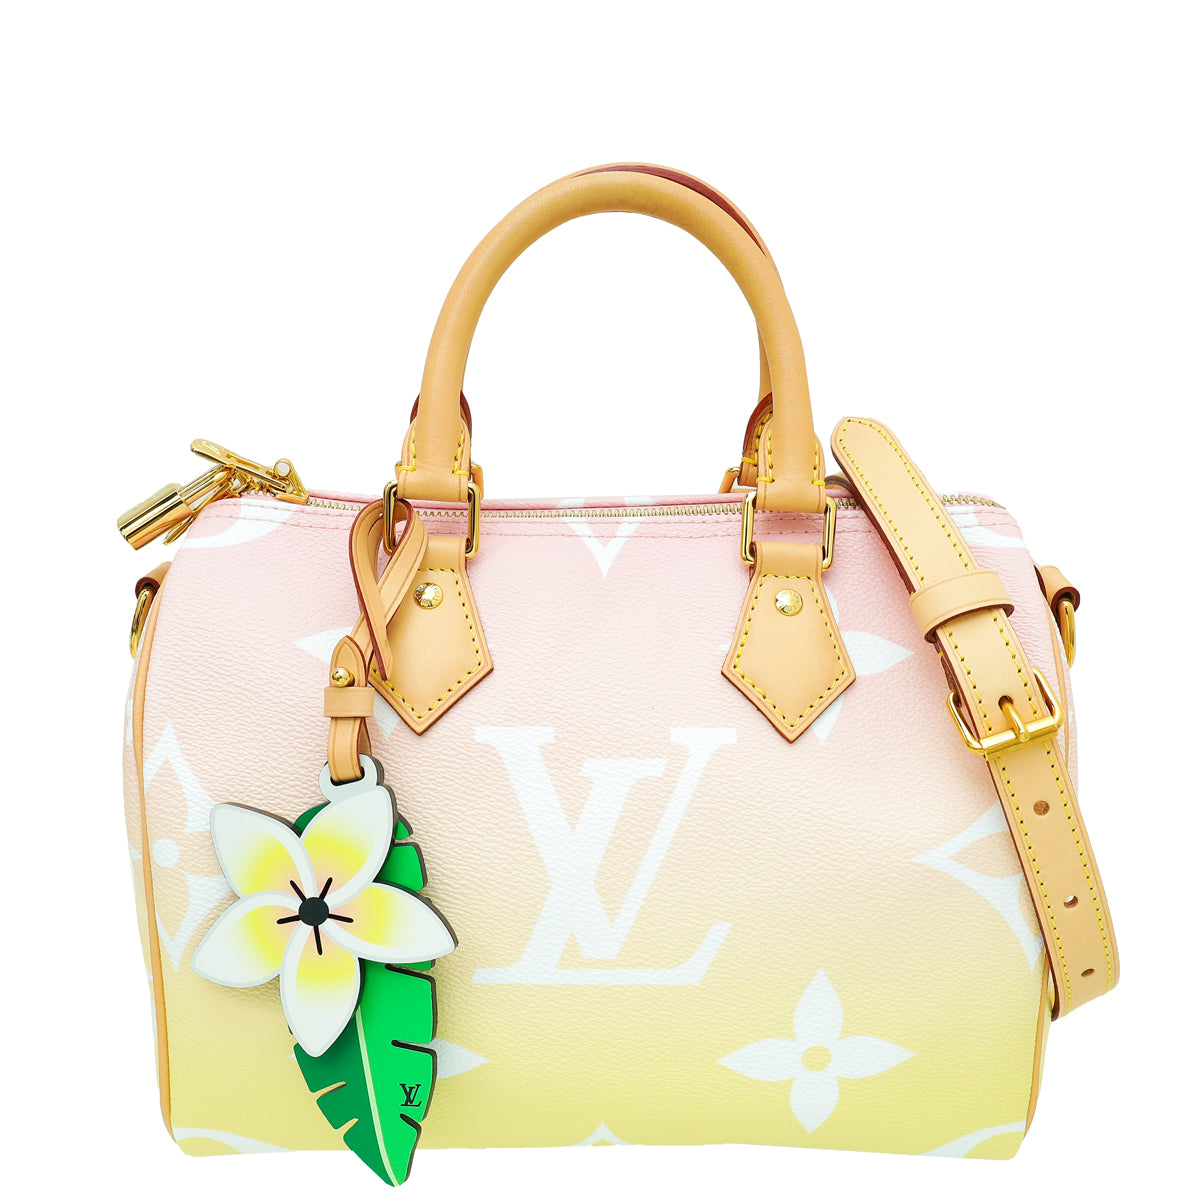 Louis Vuitton Bicolor By The Pool Speedy Bandouliere 25 Bag